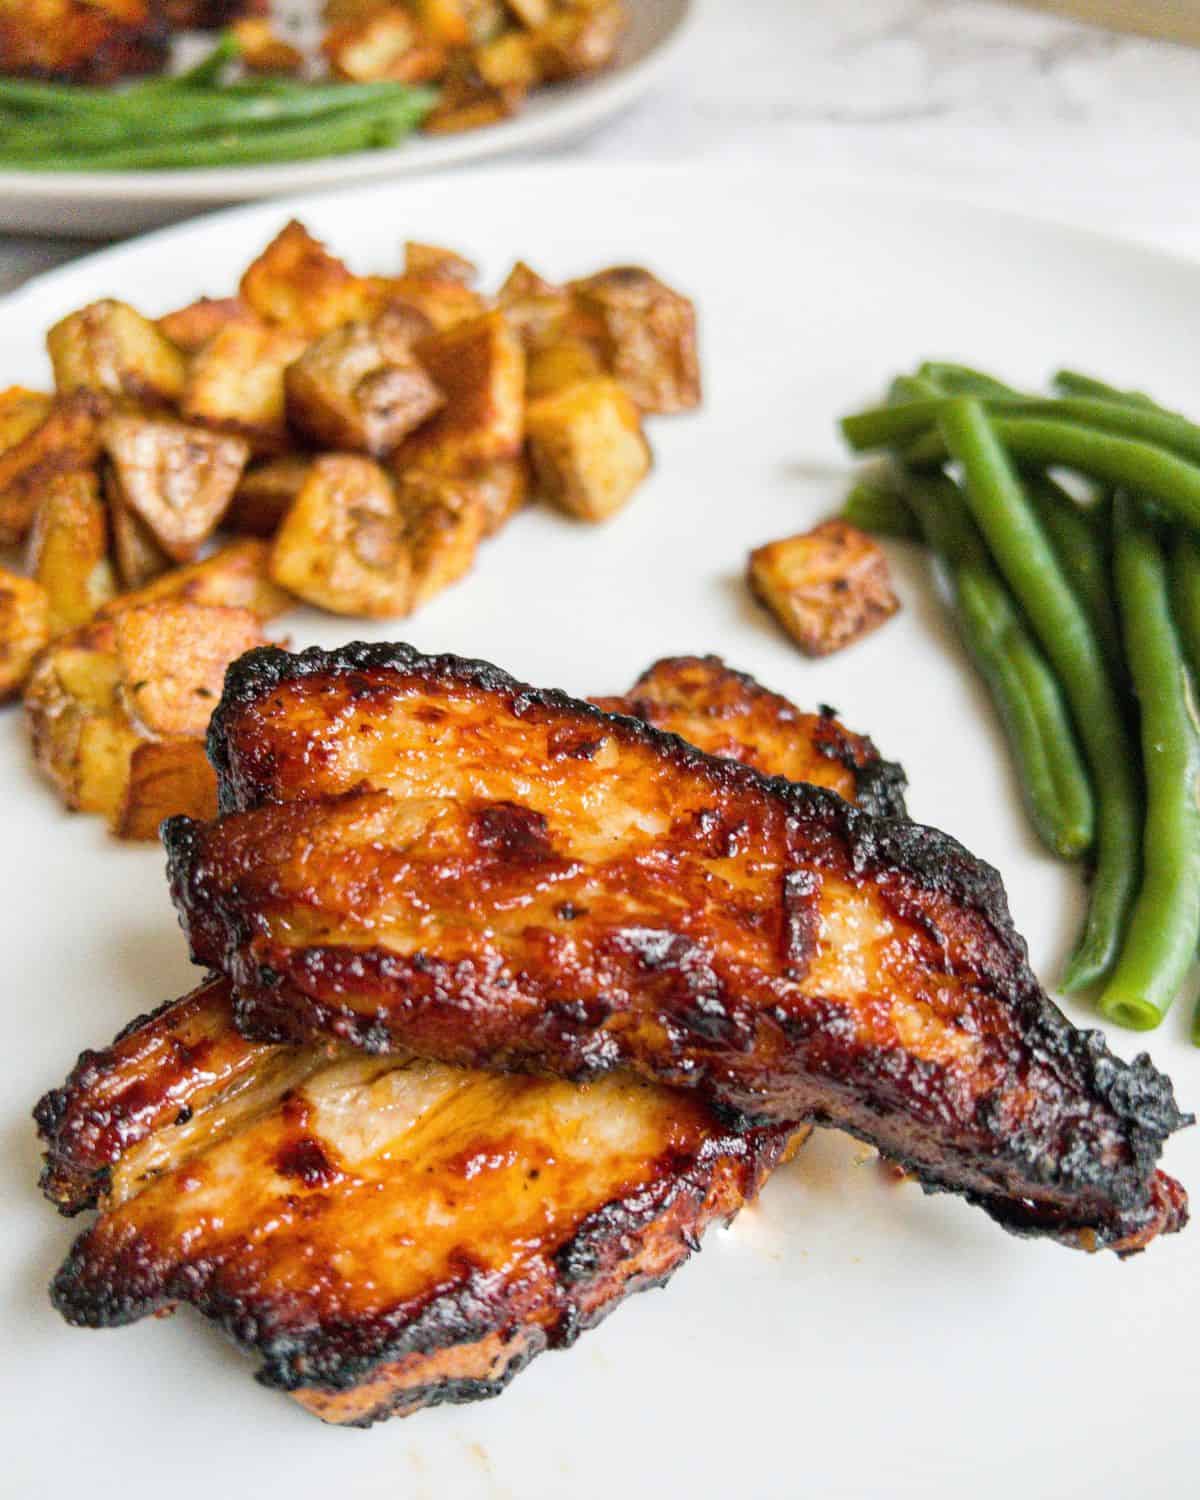 Pork belly strips, potatoes and green beans on a white plate.